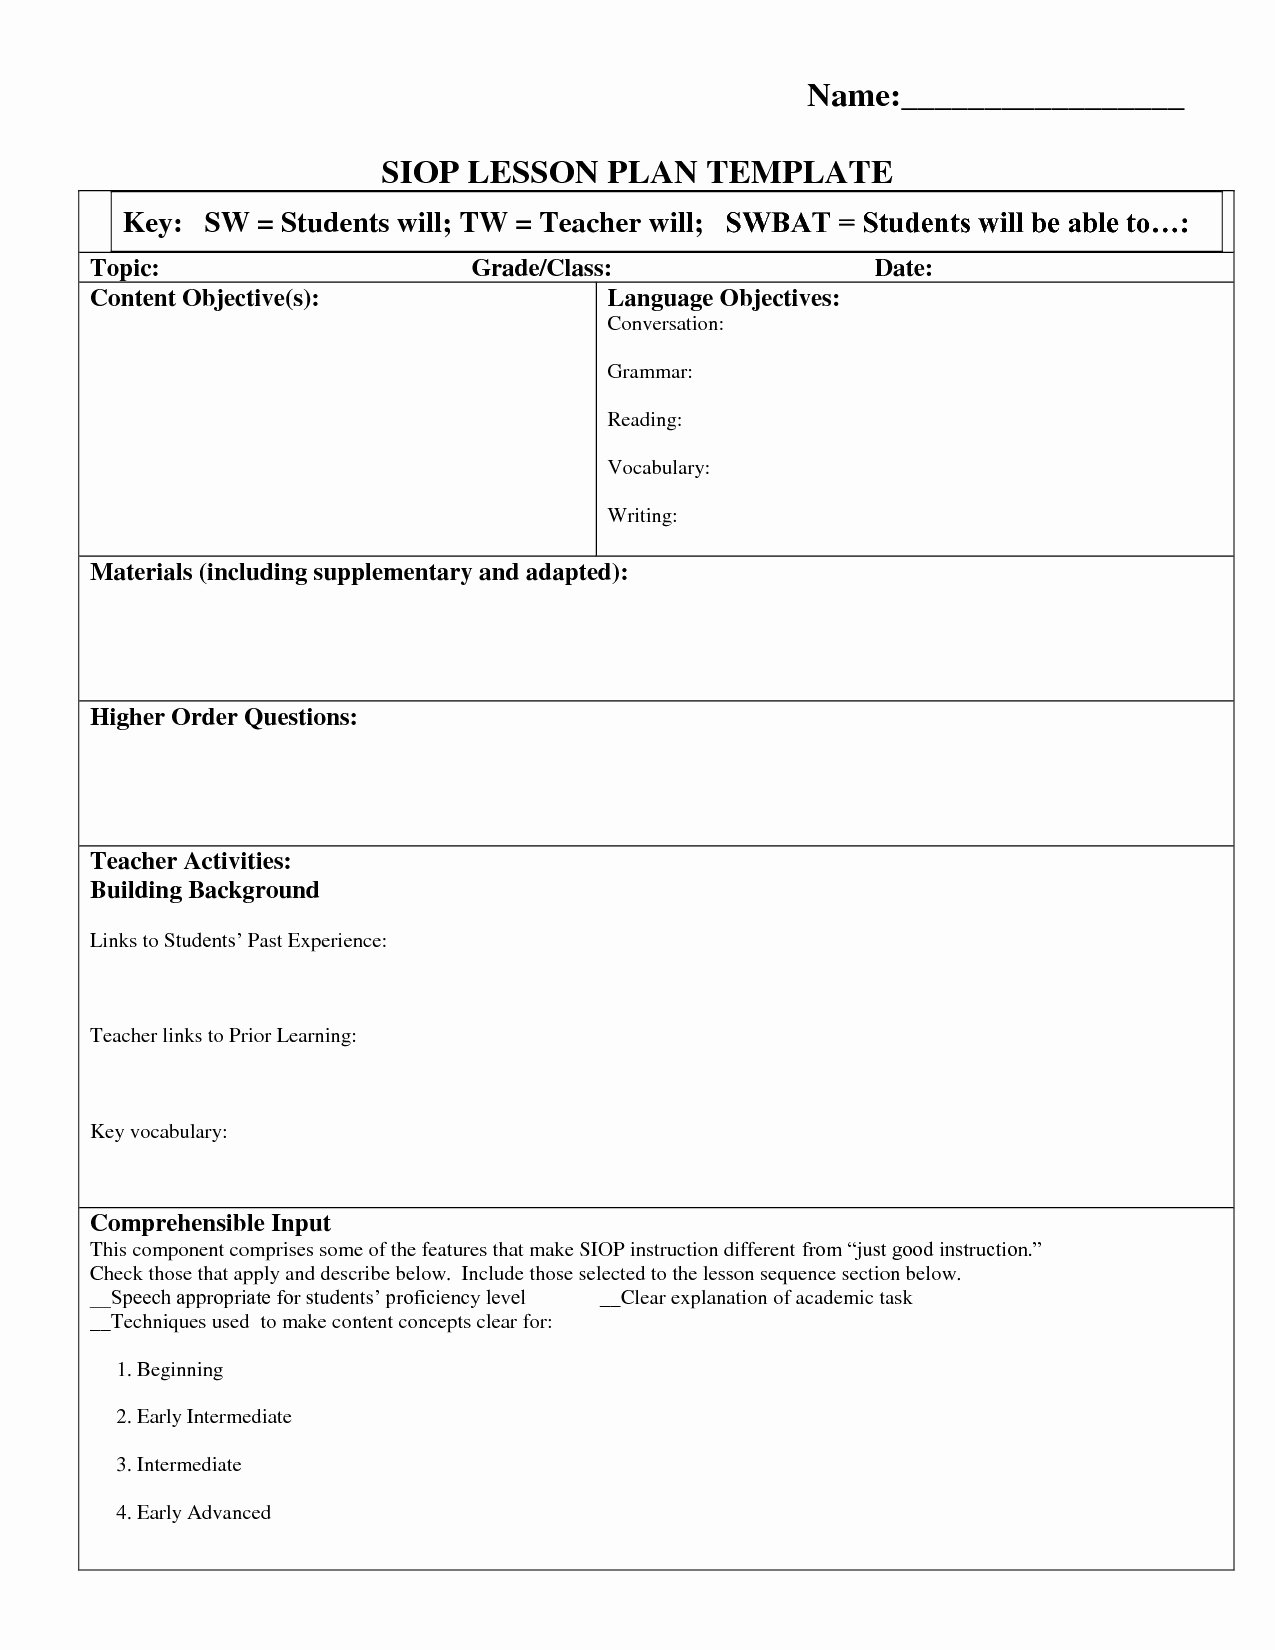 Best Lesson Plan Template New Siop Lesson Plan Template